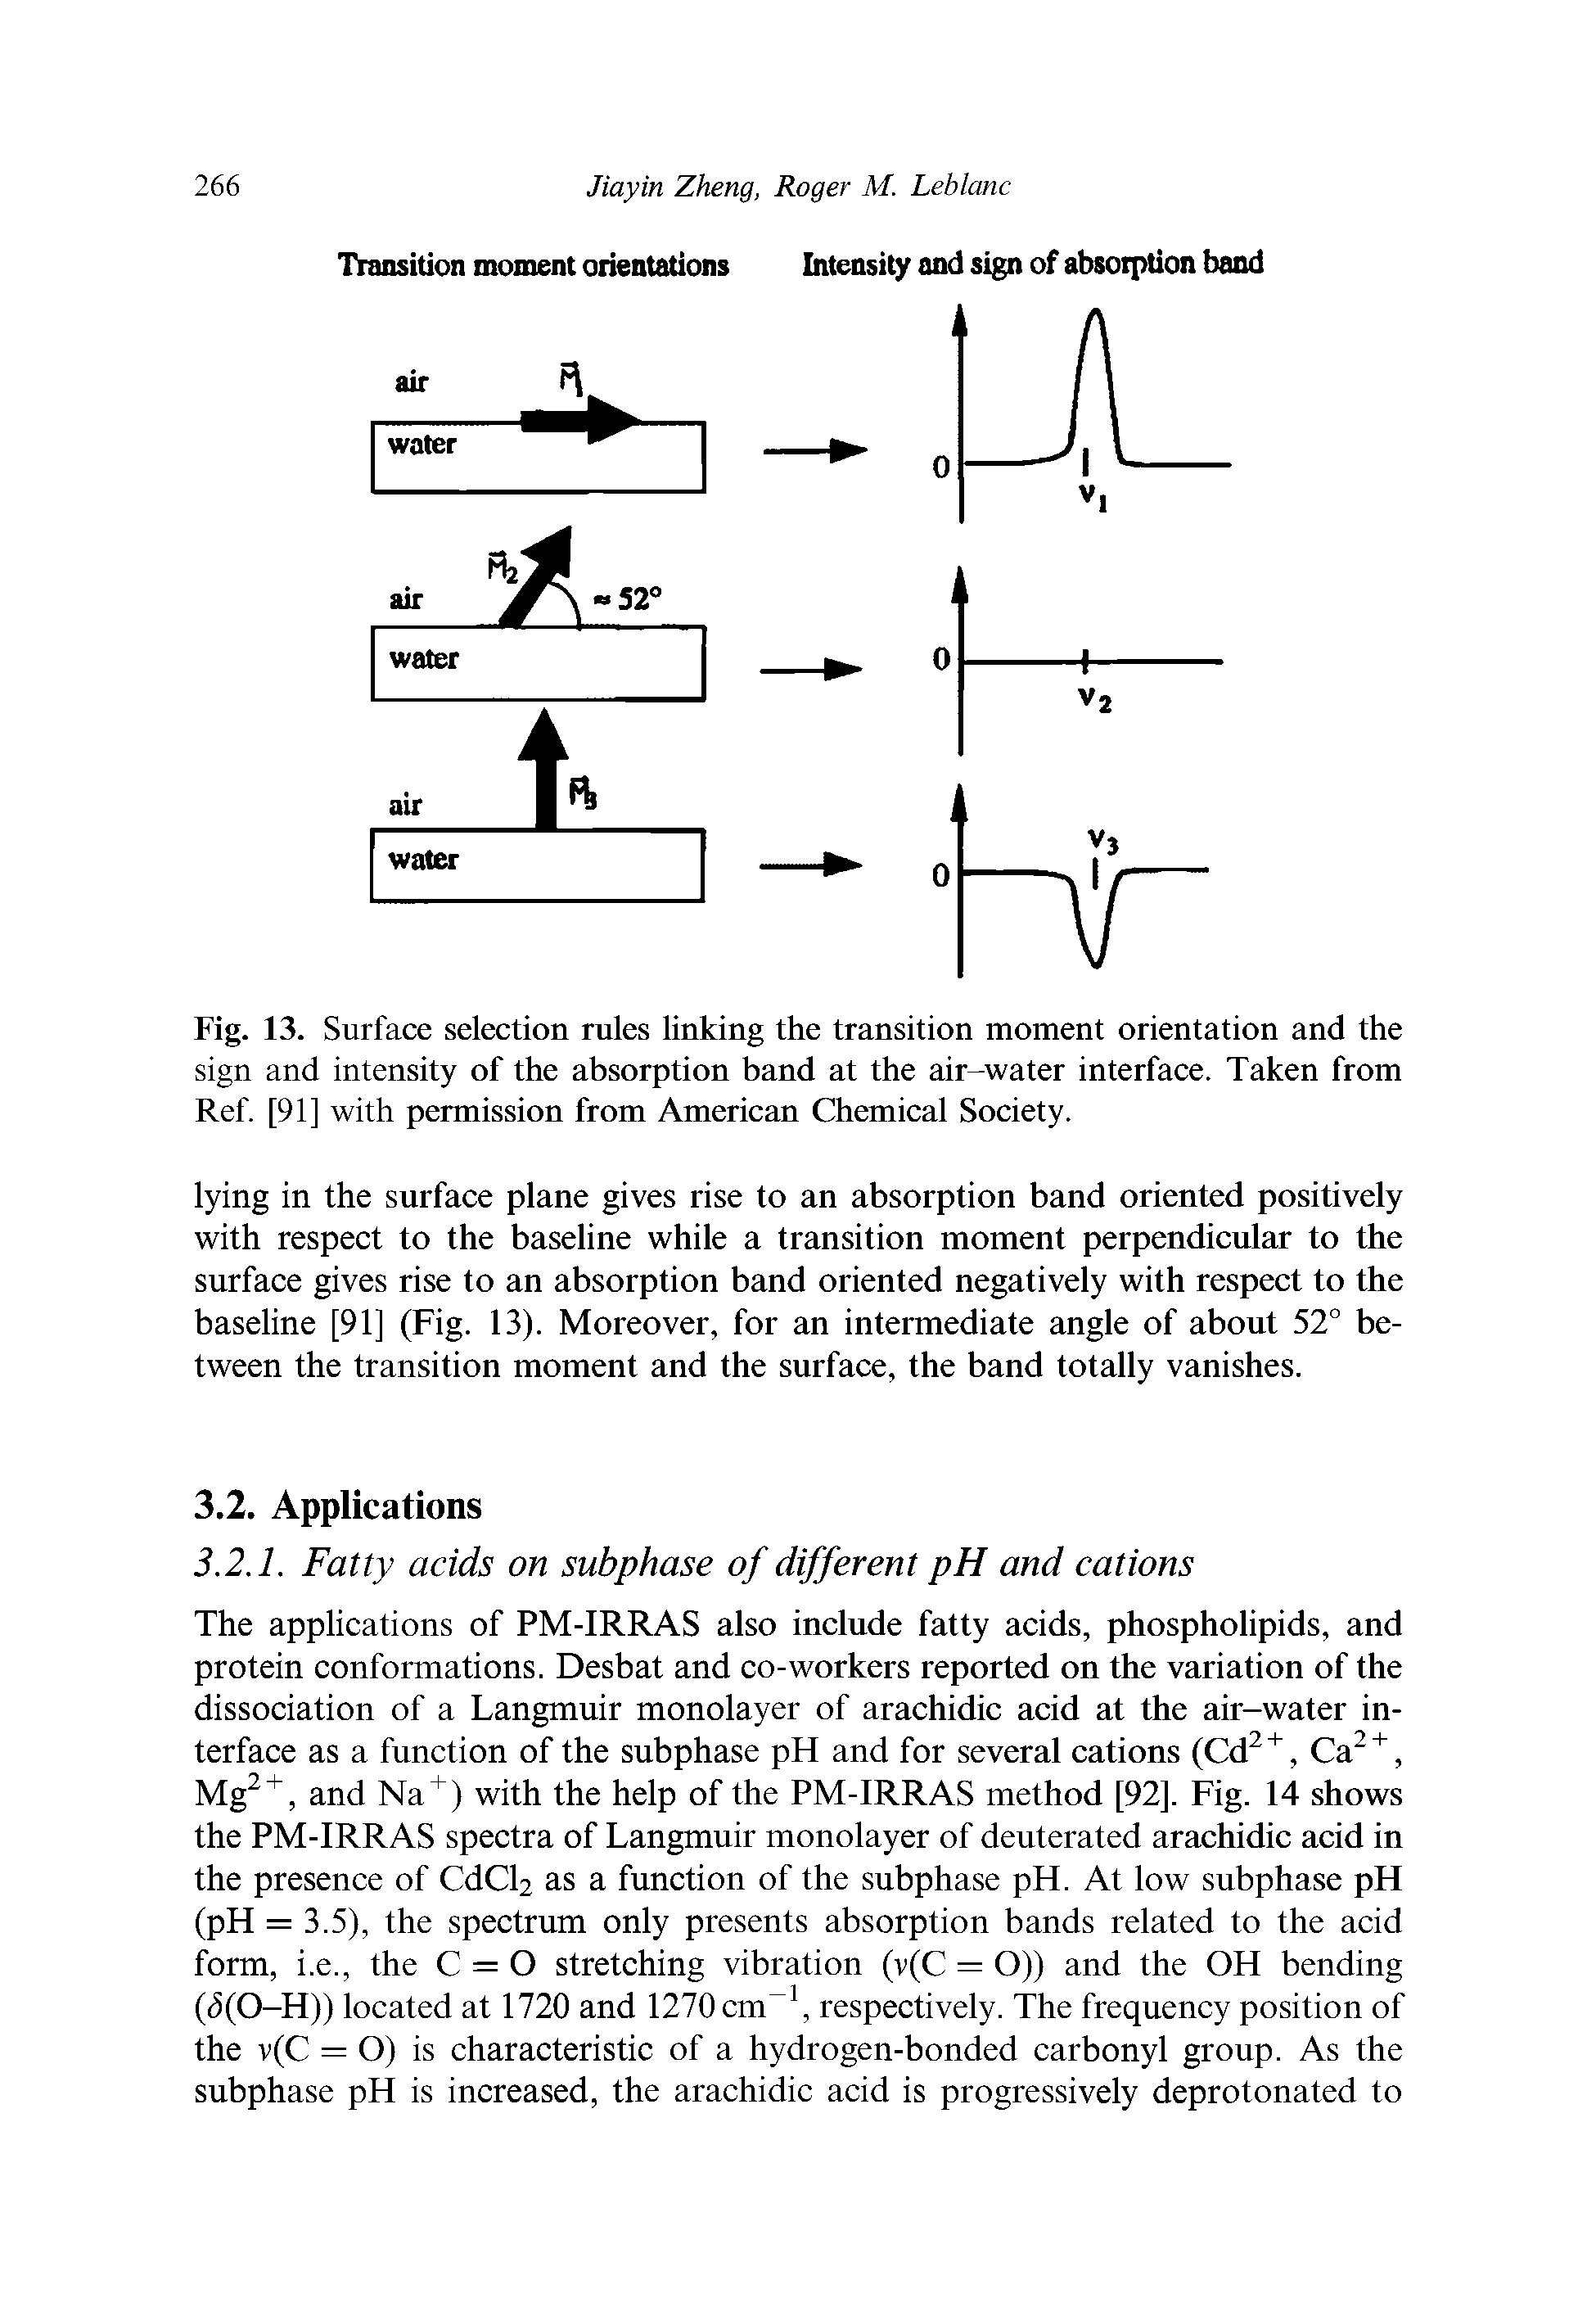 Fig. 13. Surface selection rules linking the transition moment orientation and the sign and intensity of the absorption band at the air-water interface. Taken from Ref. [91] with permission from American Chemical Society.